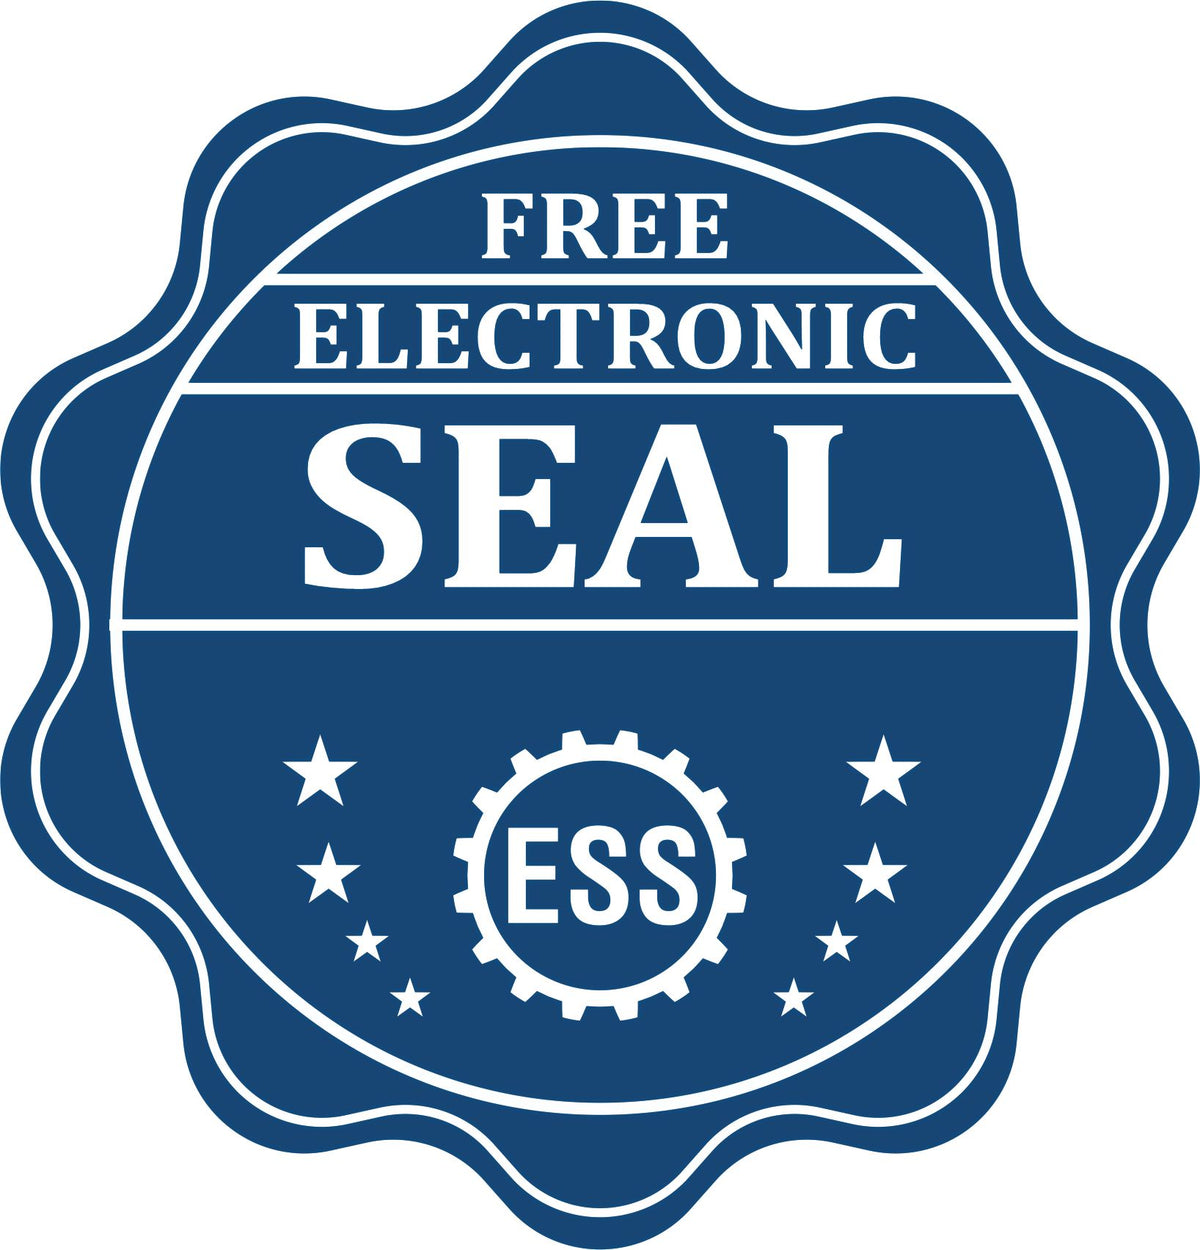 A badge showing a free electronic seal for the Slim Pre-Inked Texas Professional Engineer Seal Stamp with stars and the ESS gear on the emblem.